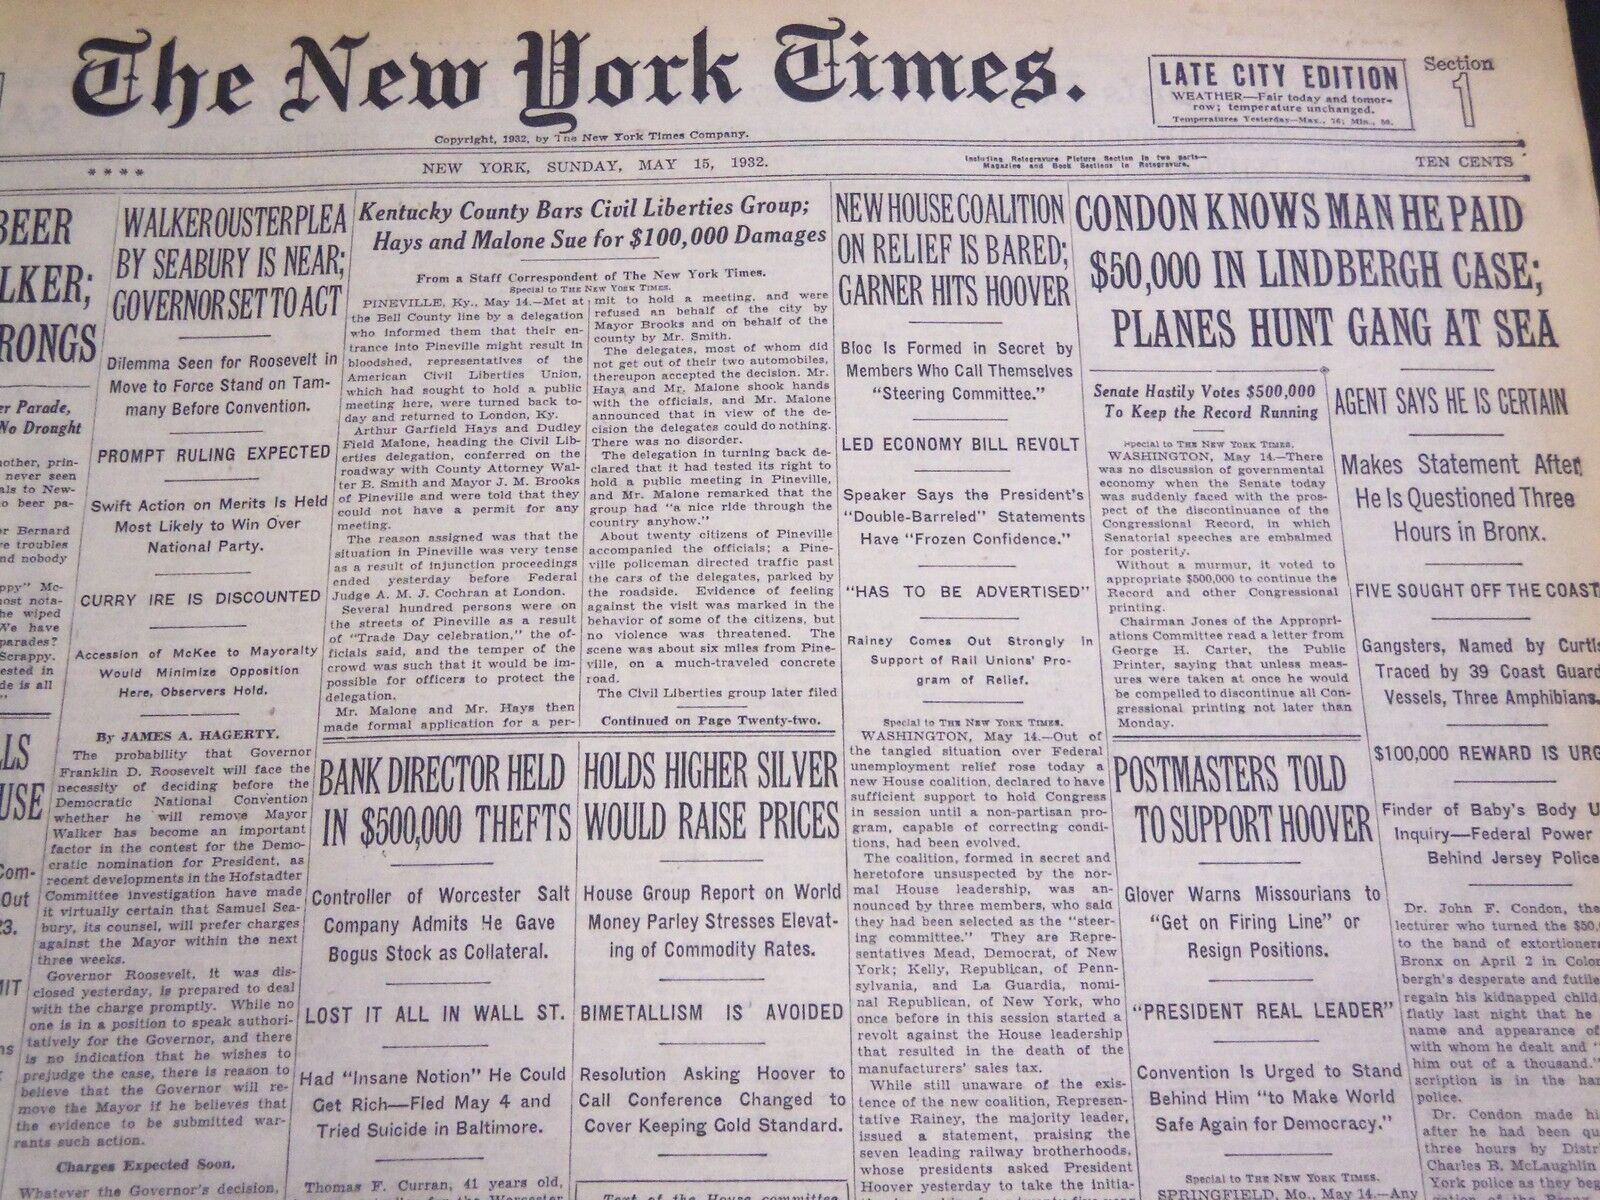 1932 MAY 15 NEW YORK TIMES - CONDON KNOWS MAN HE PAID $50,000 IN CASE - NT 4821